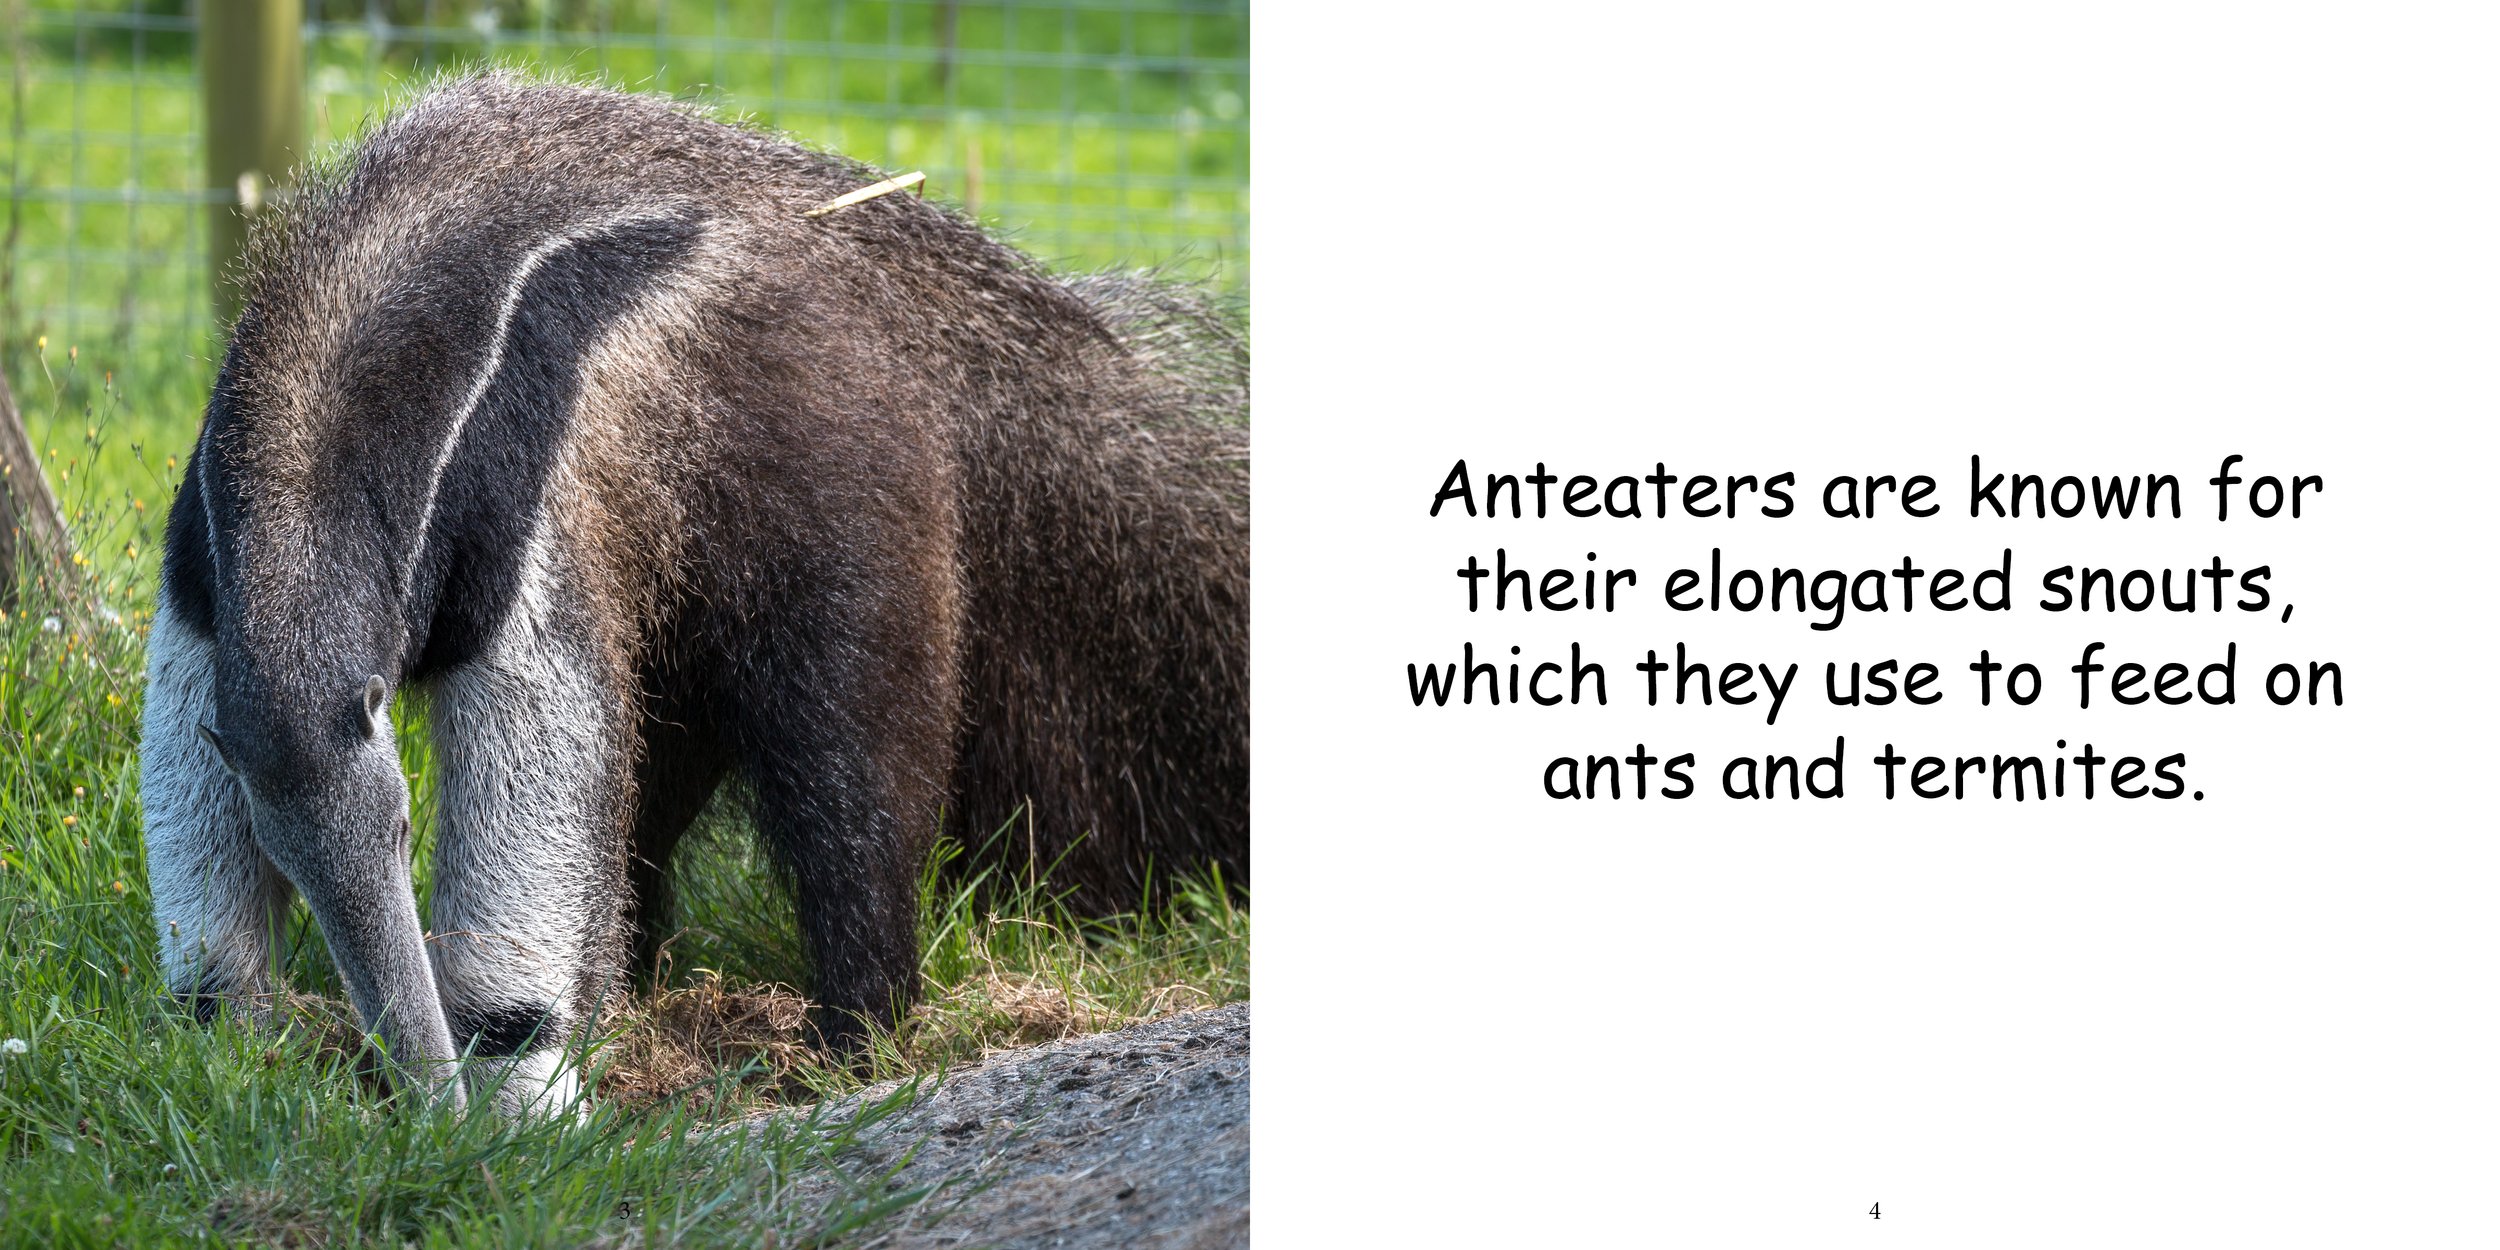 Everything about Anteaters6.jpg